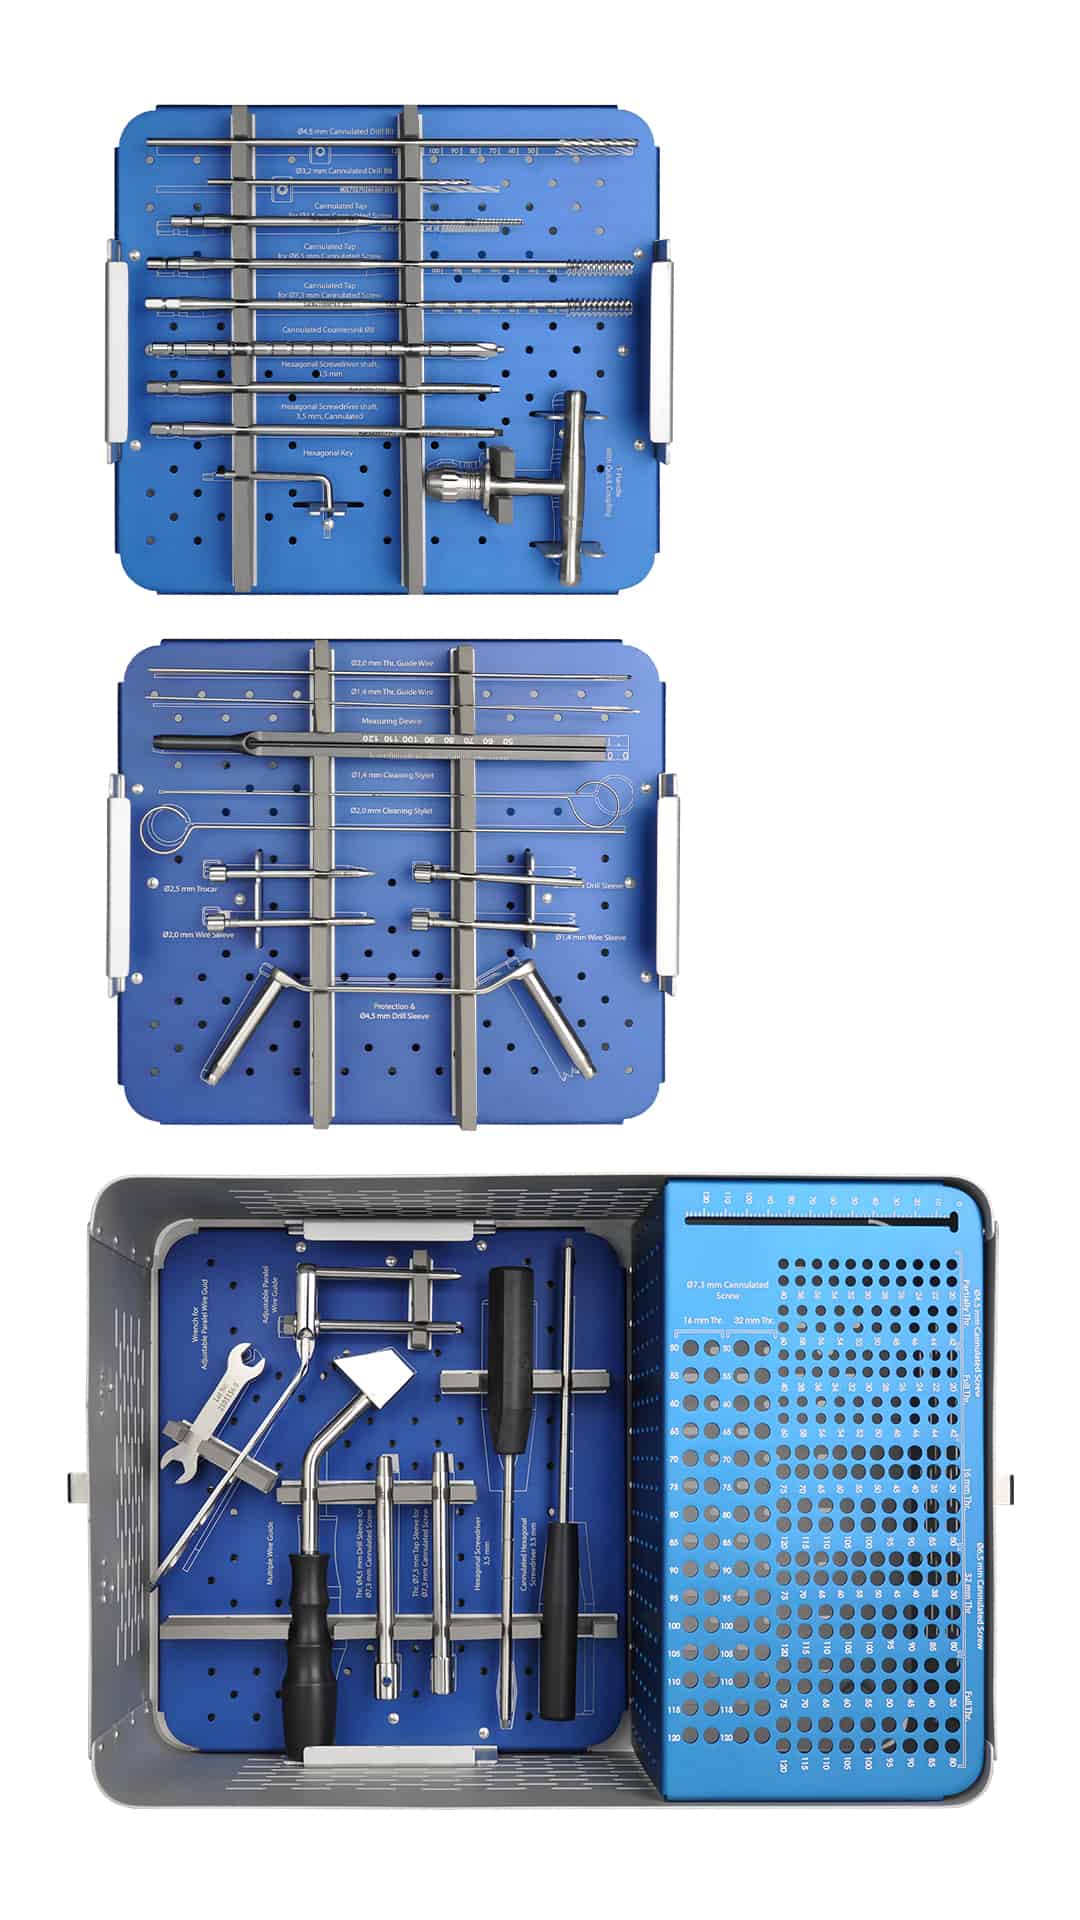 4,5/6,5/7,3 MM CANNULATED SCREW SURGERY INSTRUMENT SET - ORTIMPLANT